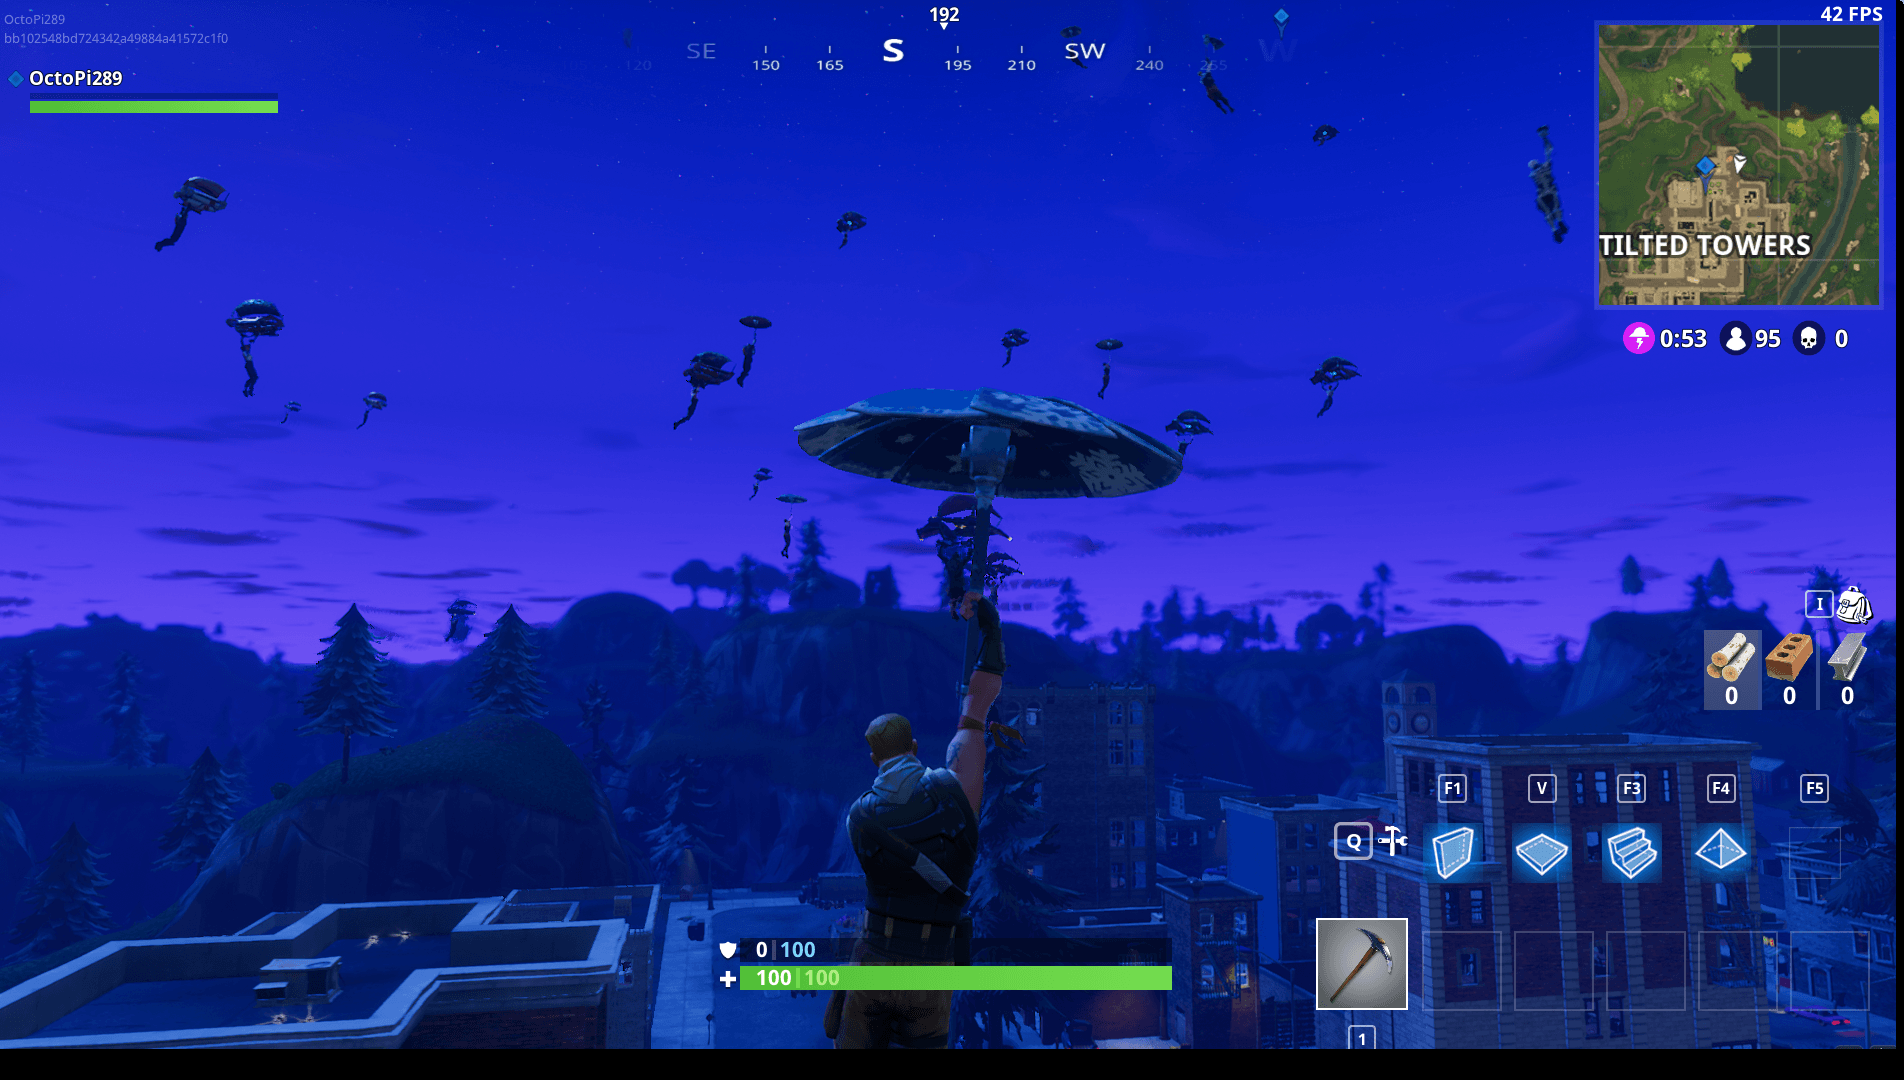 First Drop at Tilted Towers